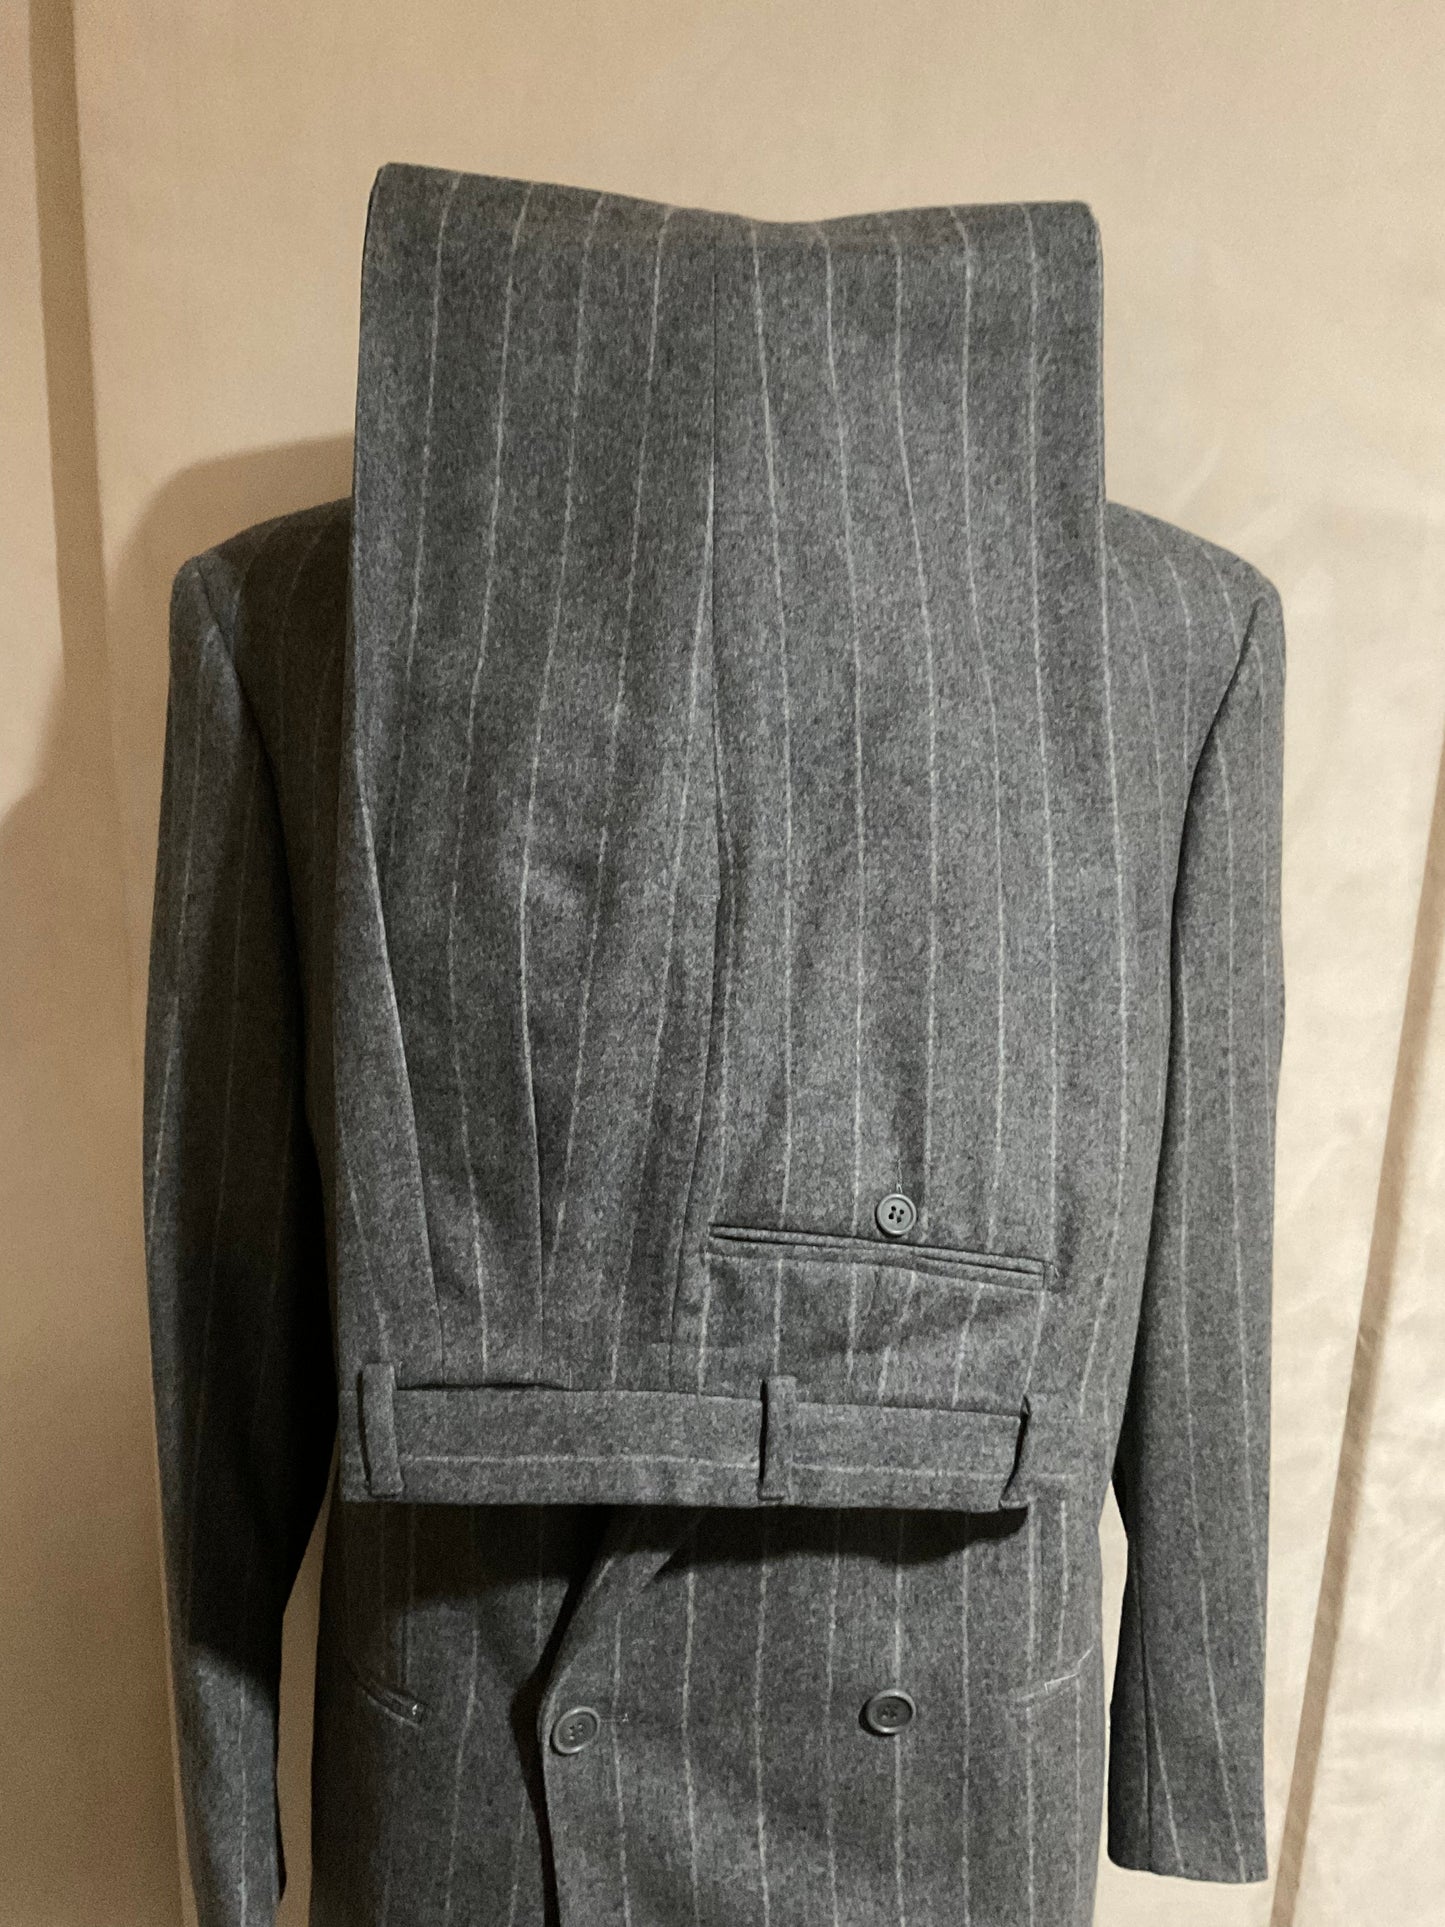 R P SUIT / DOUBLE BREASTED / CUSTOM BESPOKE / GREY CHALK STRIPE / 40 REG / MADE IN ITALY